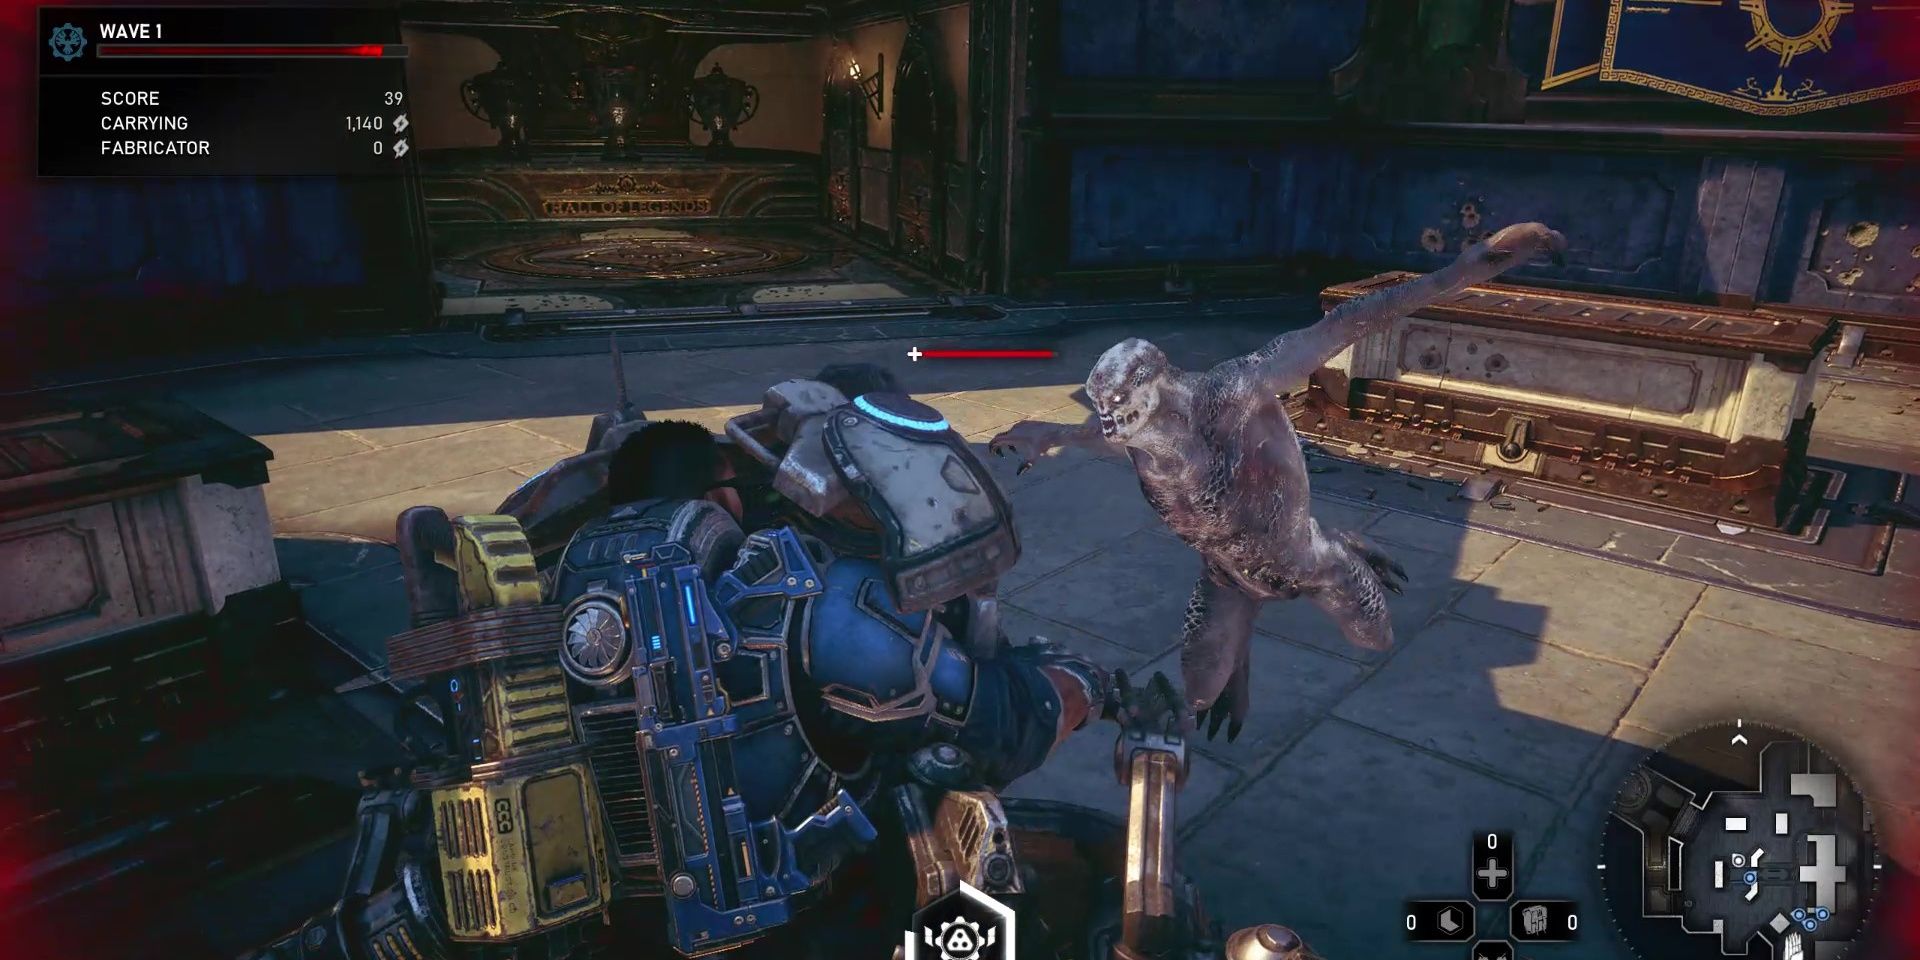 Pilot special ability in Gears 5